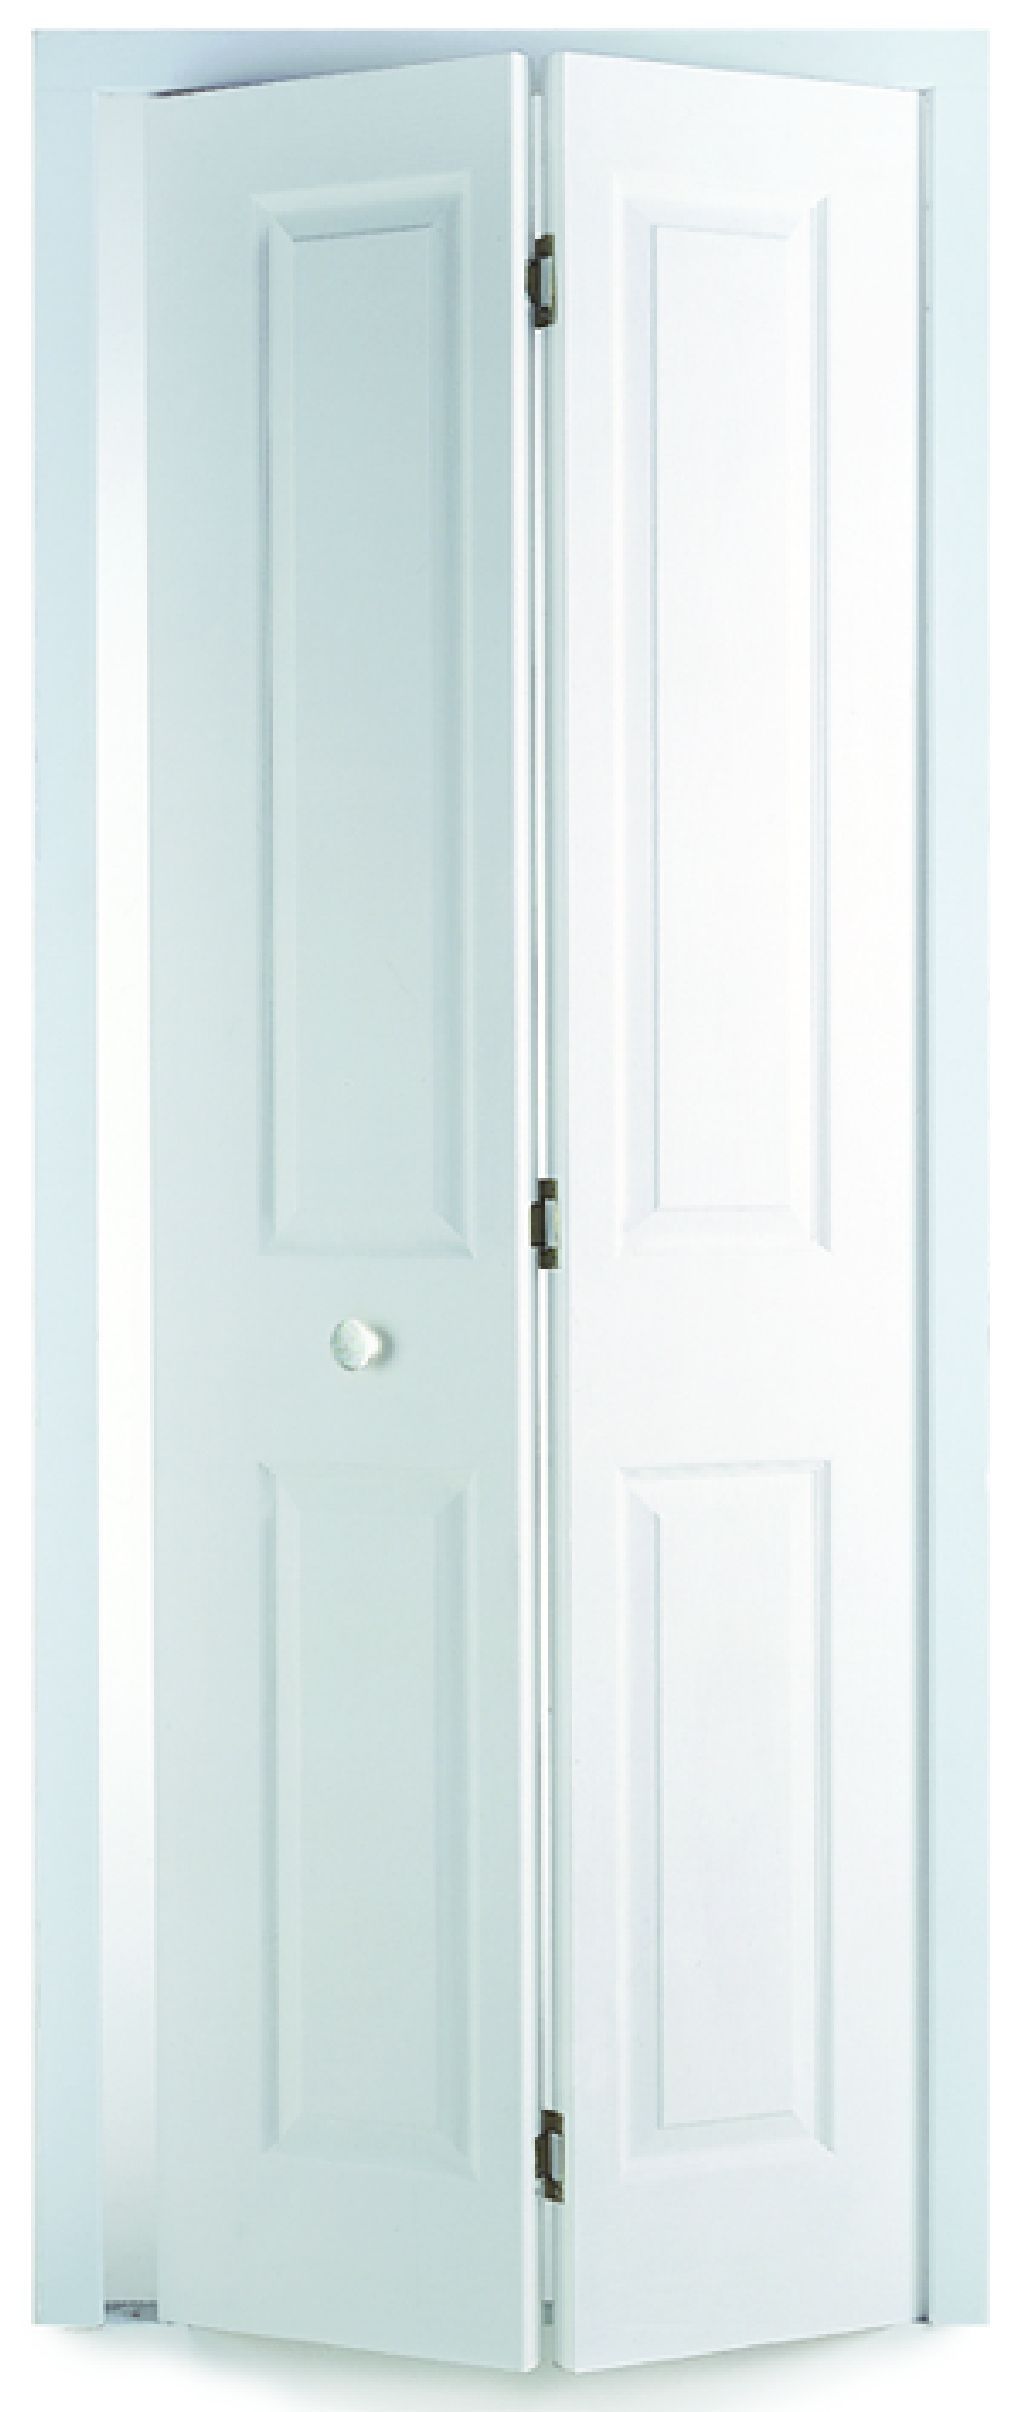 Image of Wickes Chester White Smooth Moulded 4 Panel Internal Bi-Fold Door - 1981 x 762mm